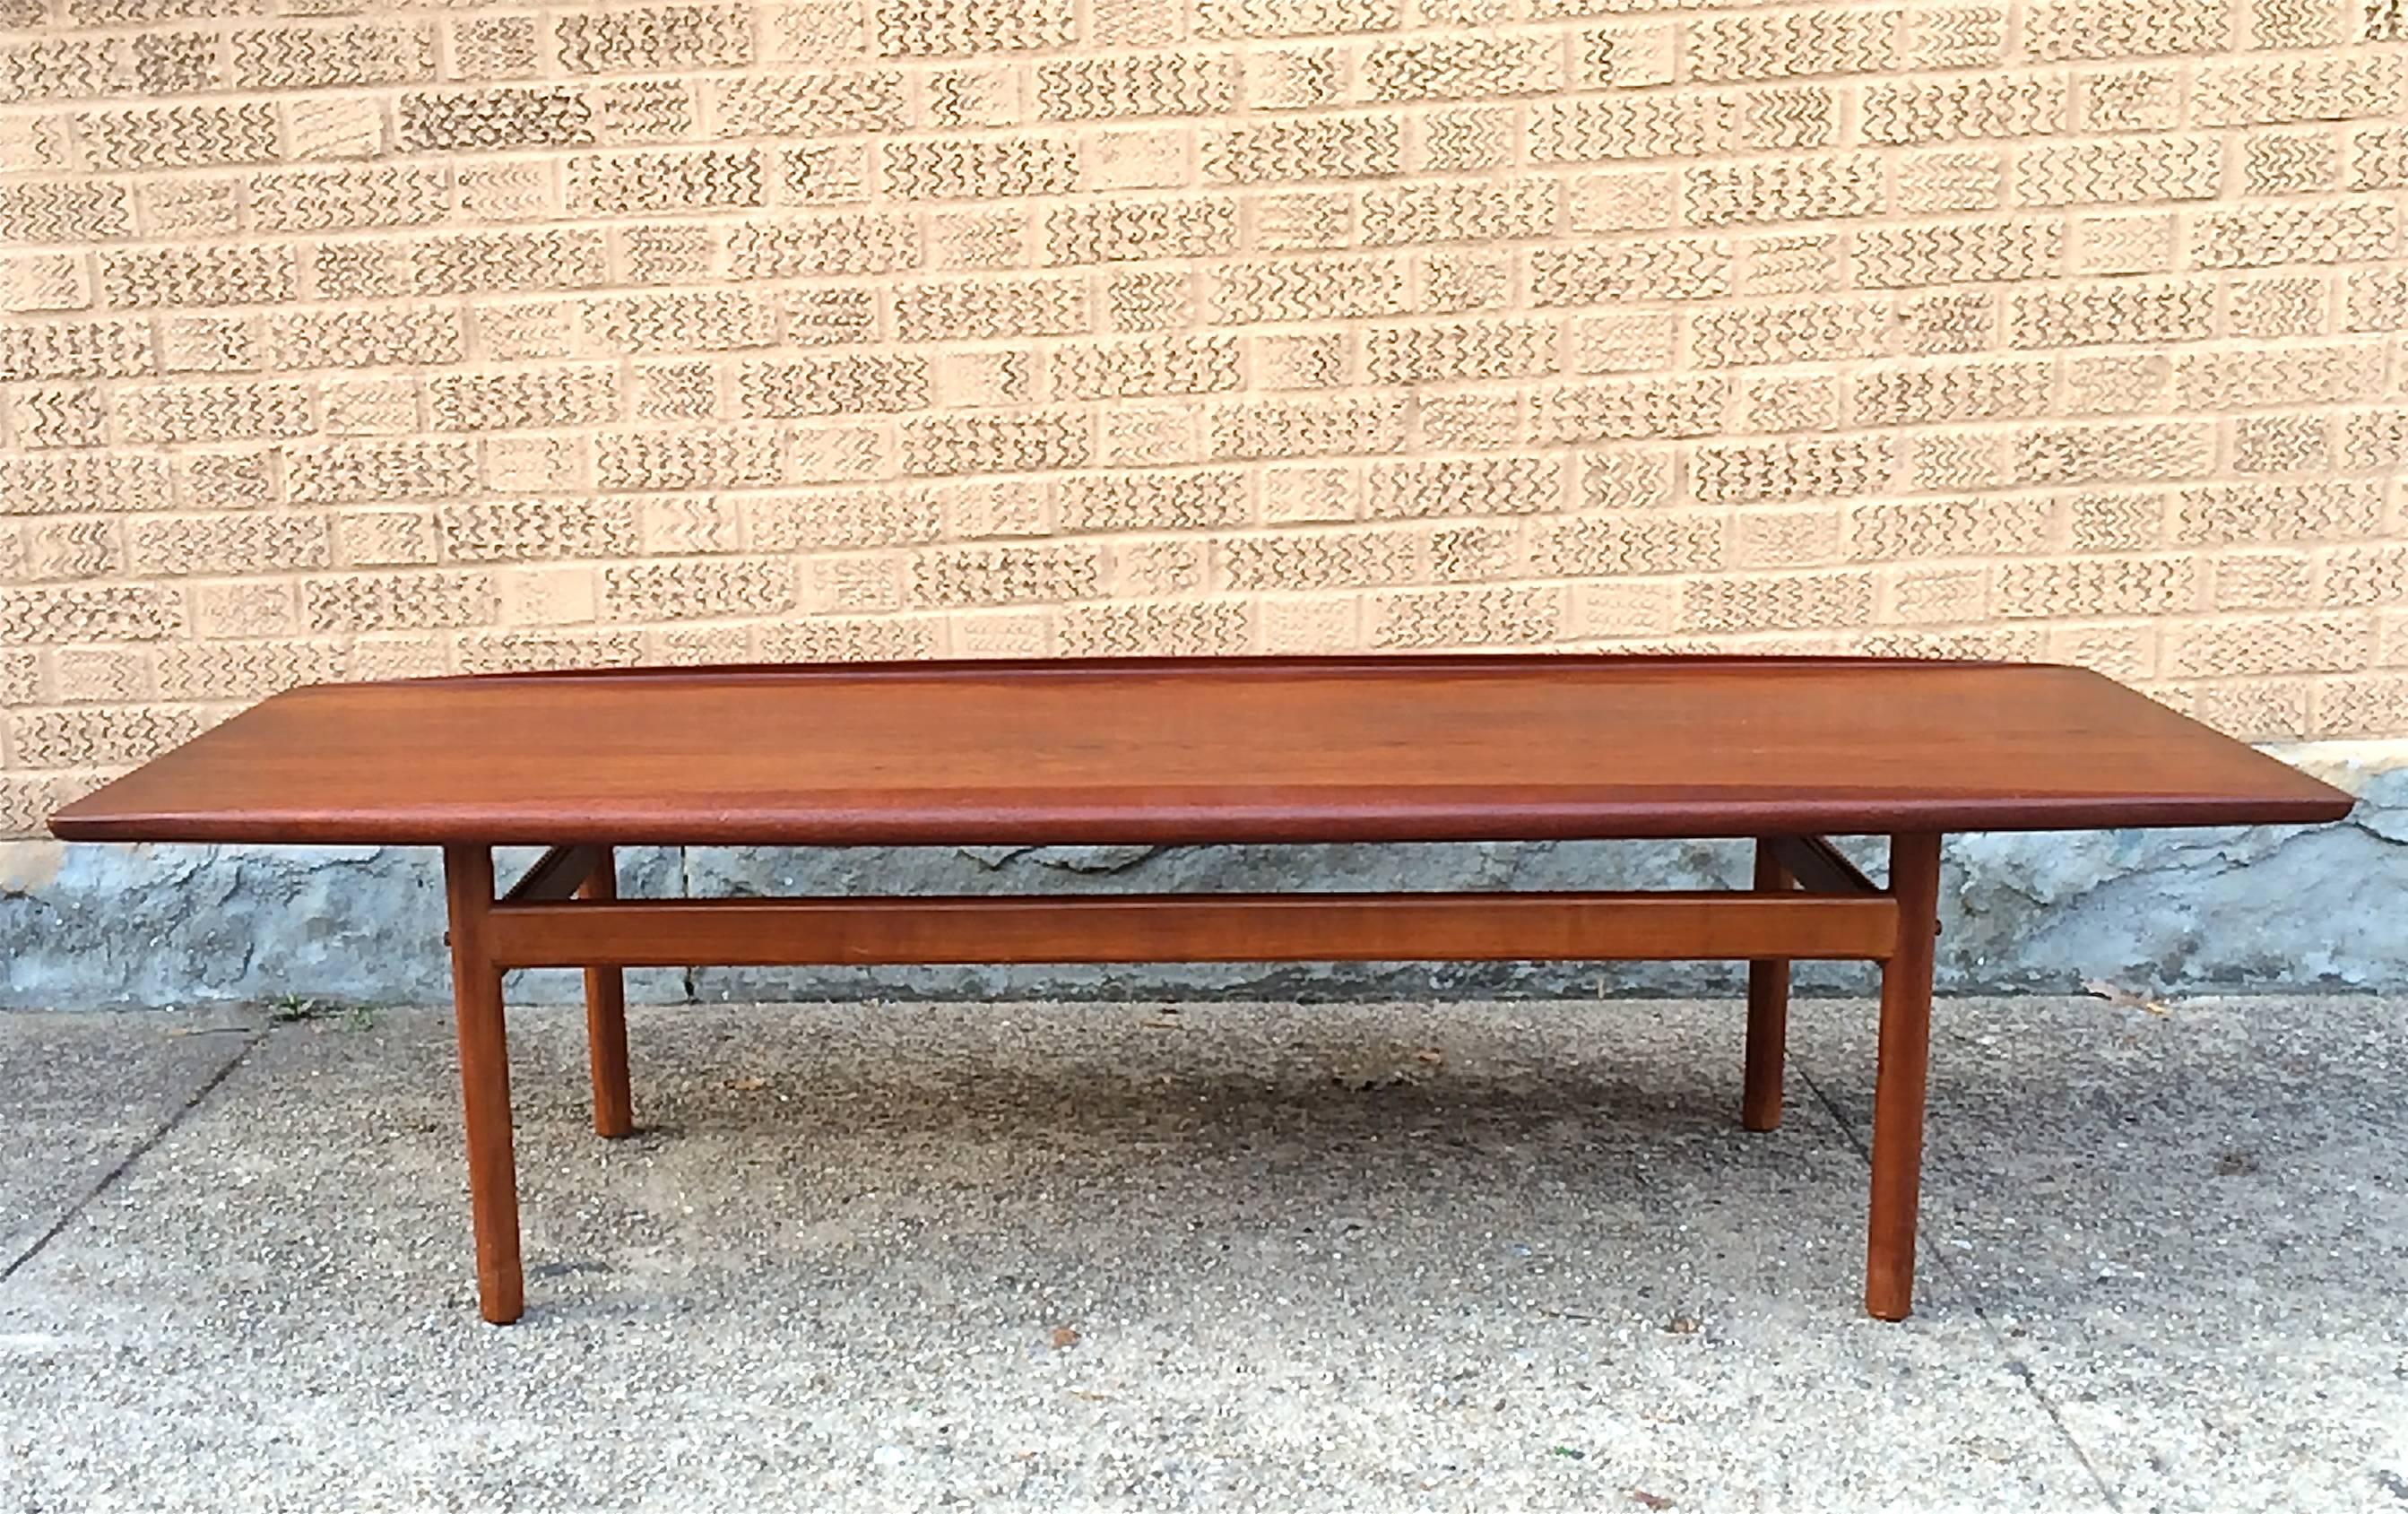 Solid teak, coffee table by DUX with slightly upturned edges attributed to Folke Ohlsson.